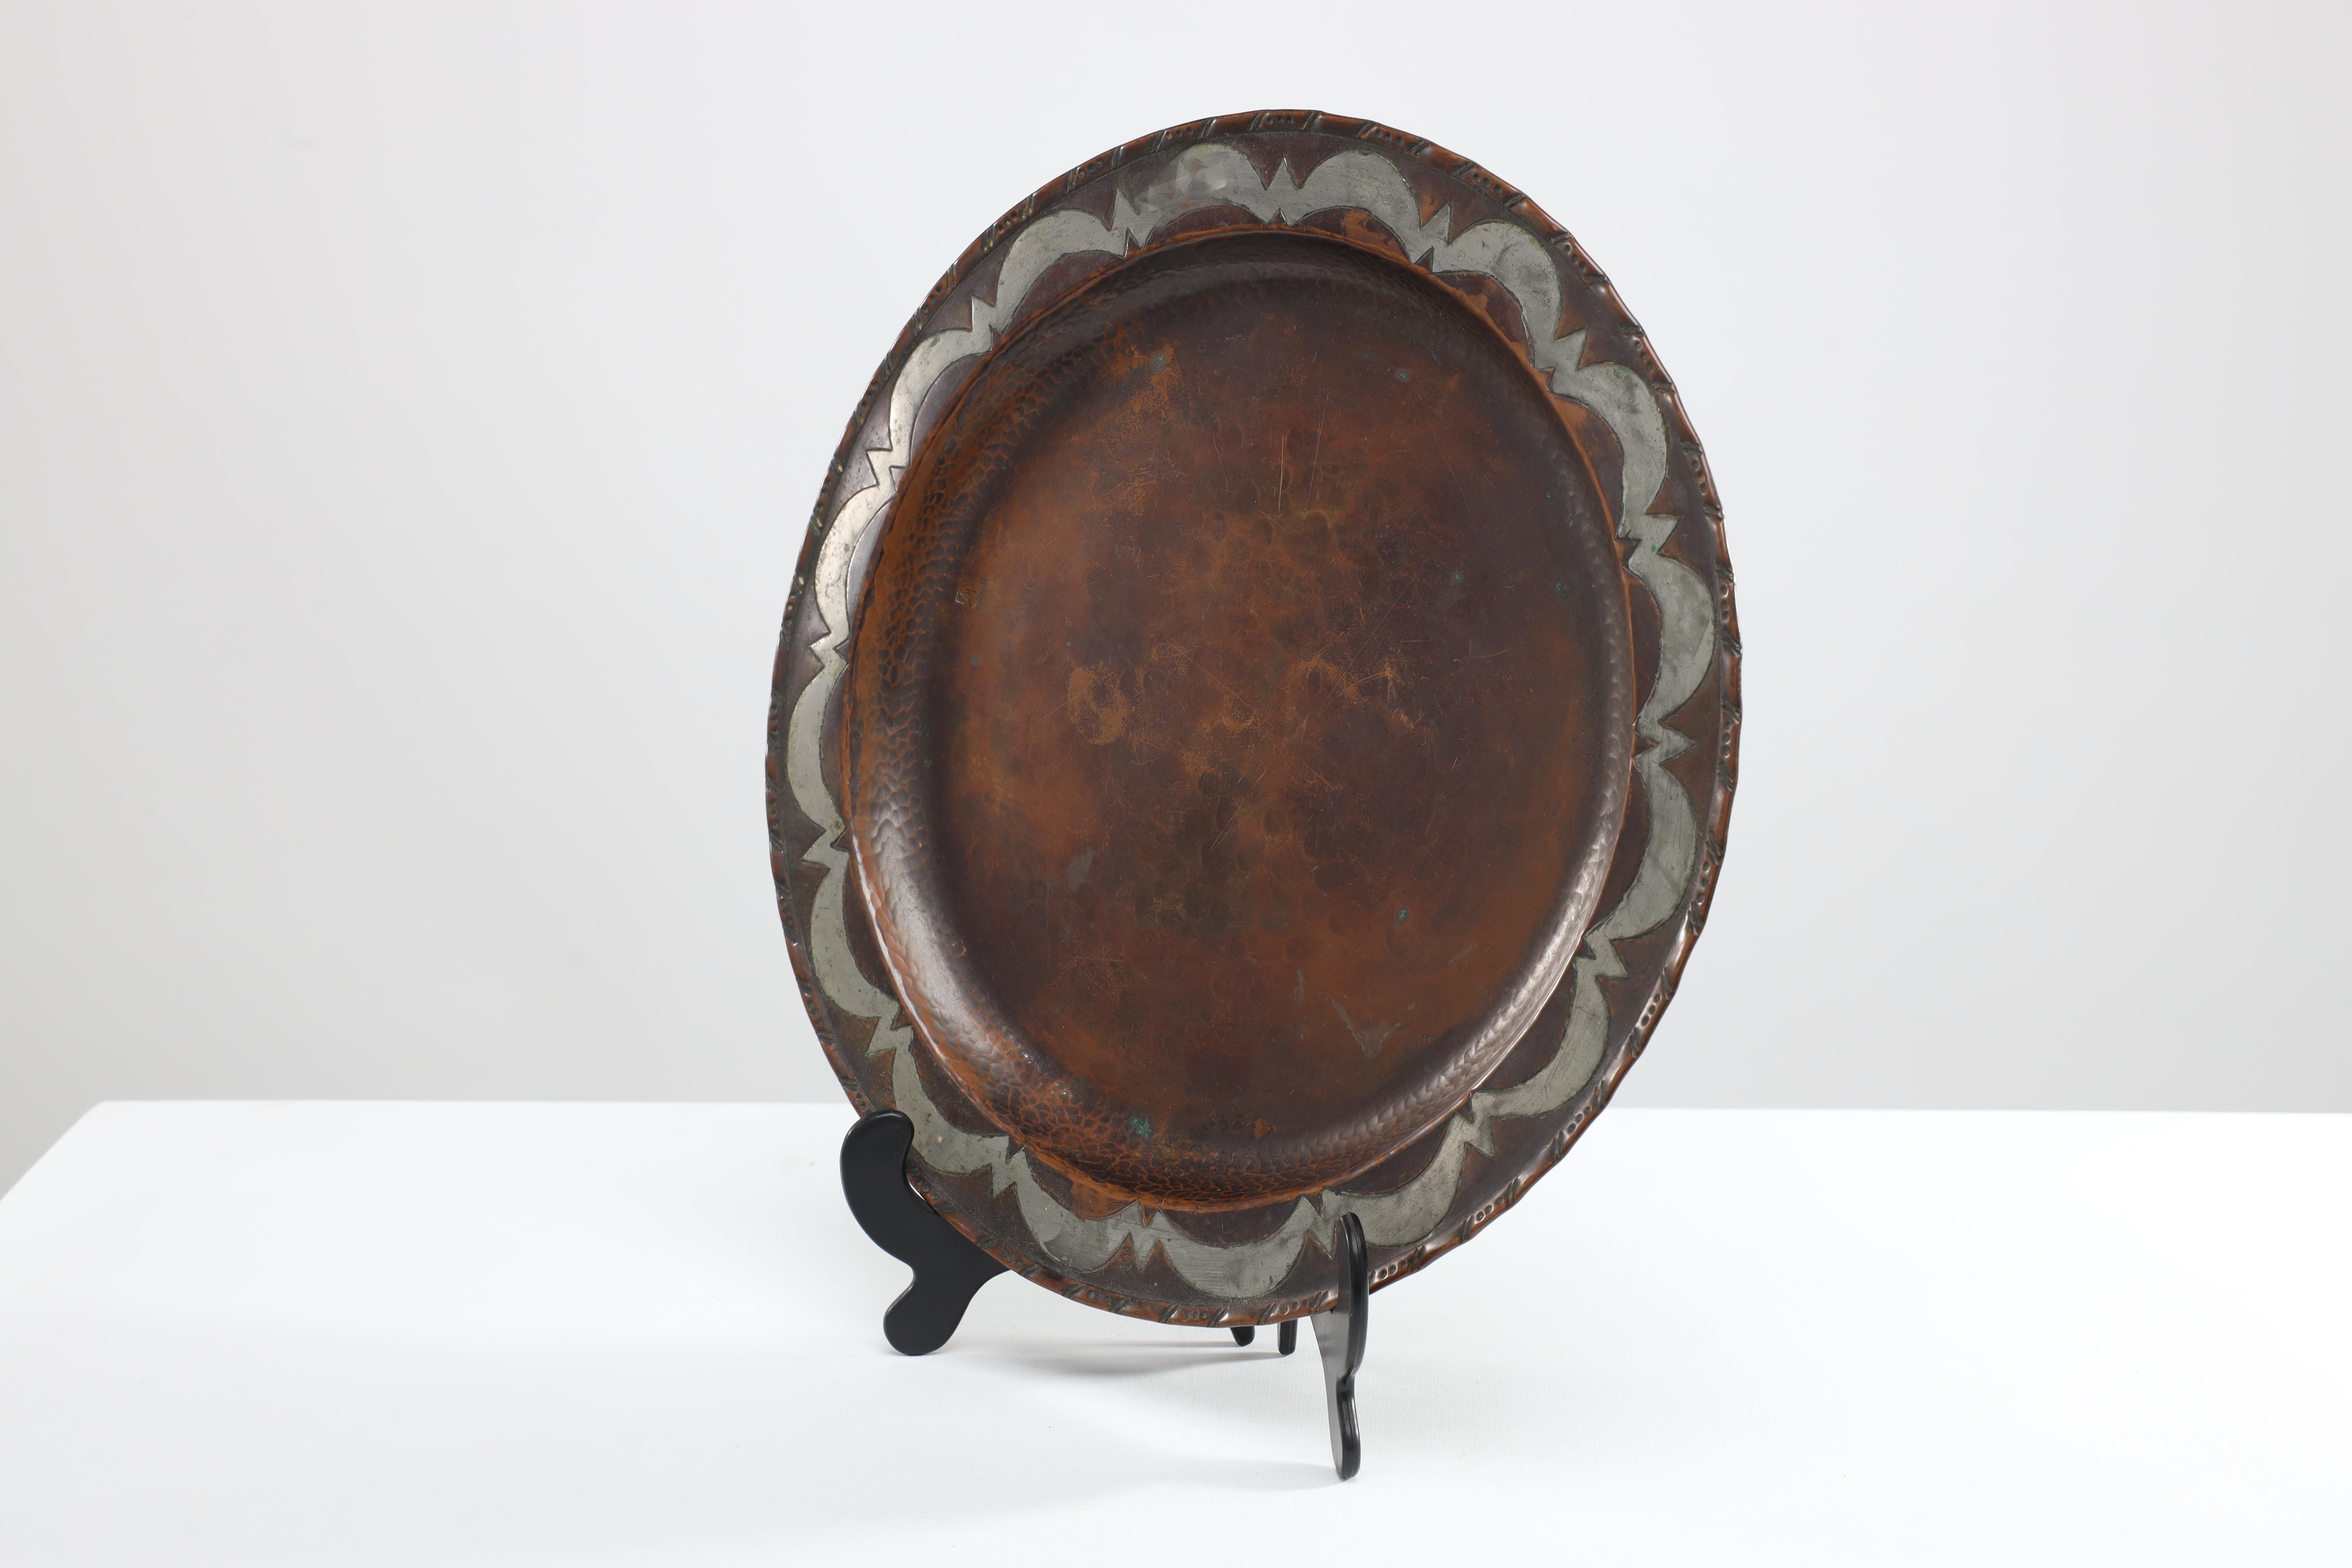 Hugh Wallis. An Arts & Crafts hand formed round copper plate with chased decoration to the edge and inlaid to the inner edge with pewter. Stamped HW in a square. Nice chocolait patina. Hugh Wallis was based in Altrincham, near Manchester in the